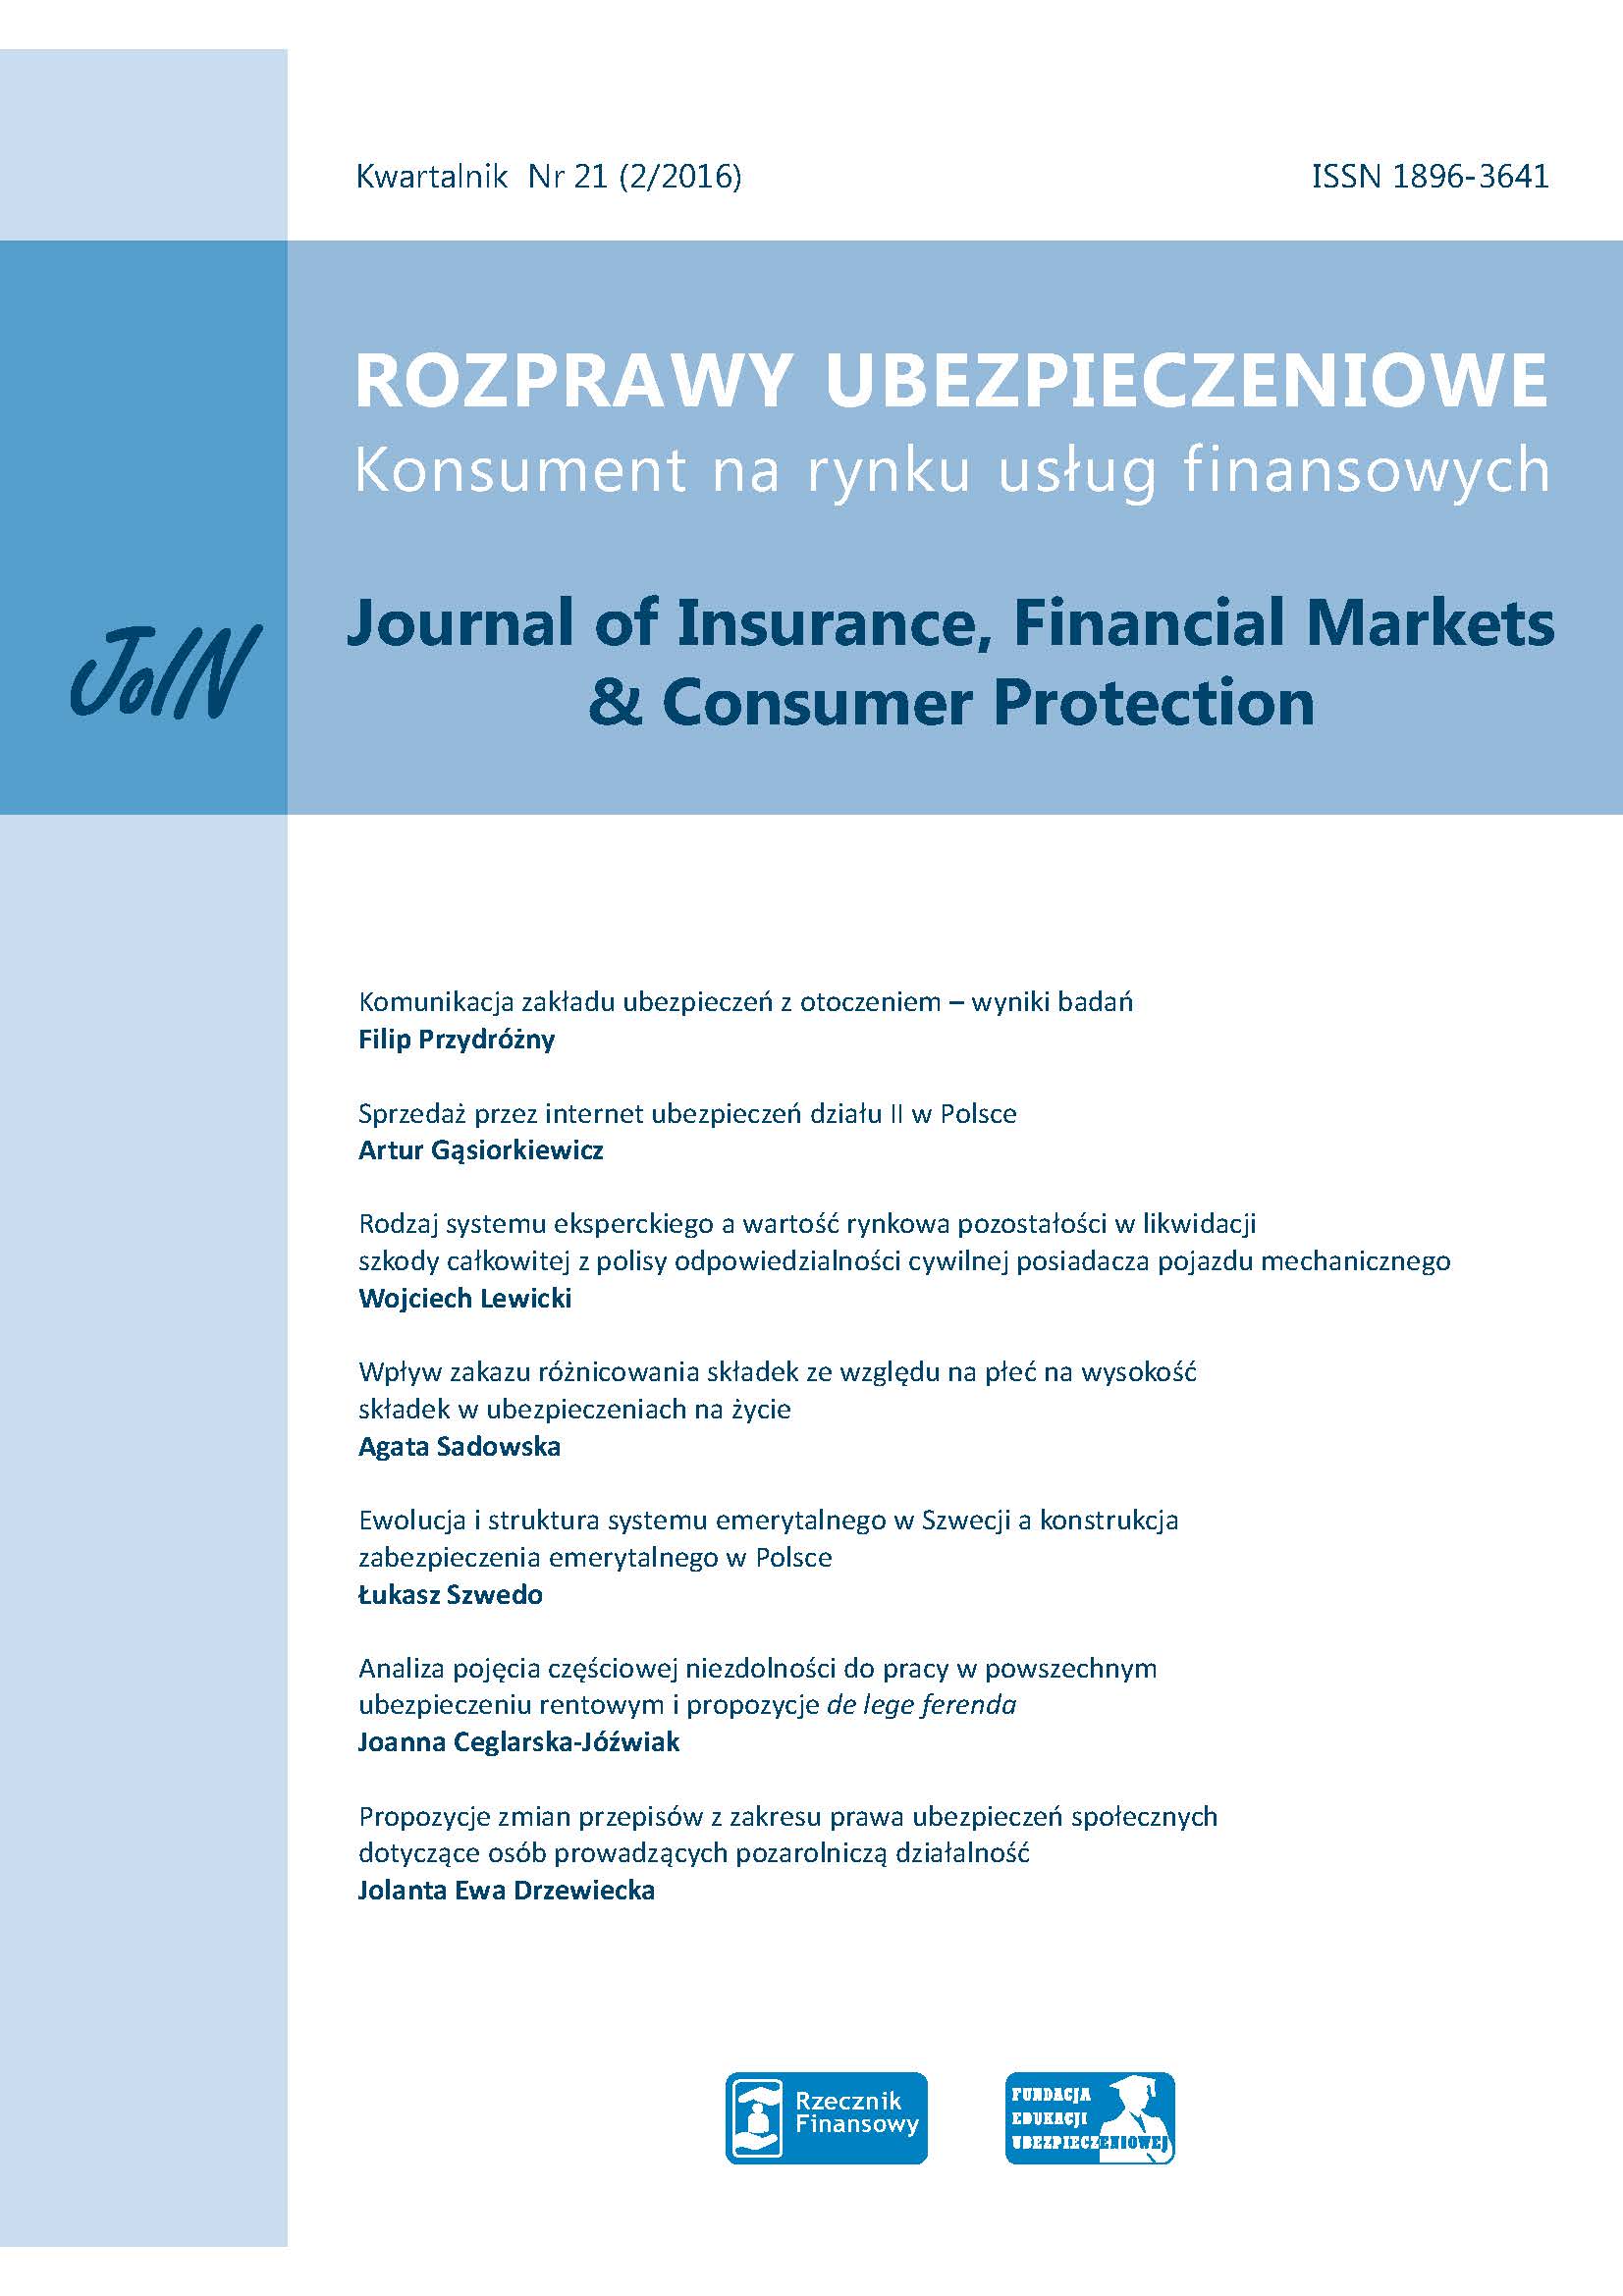 Proposal of amendments to the regulations of the social security law Cover Image